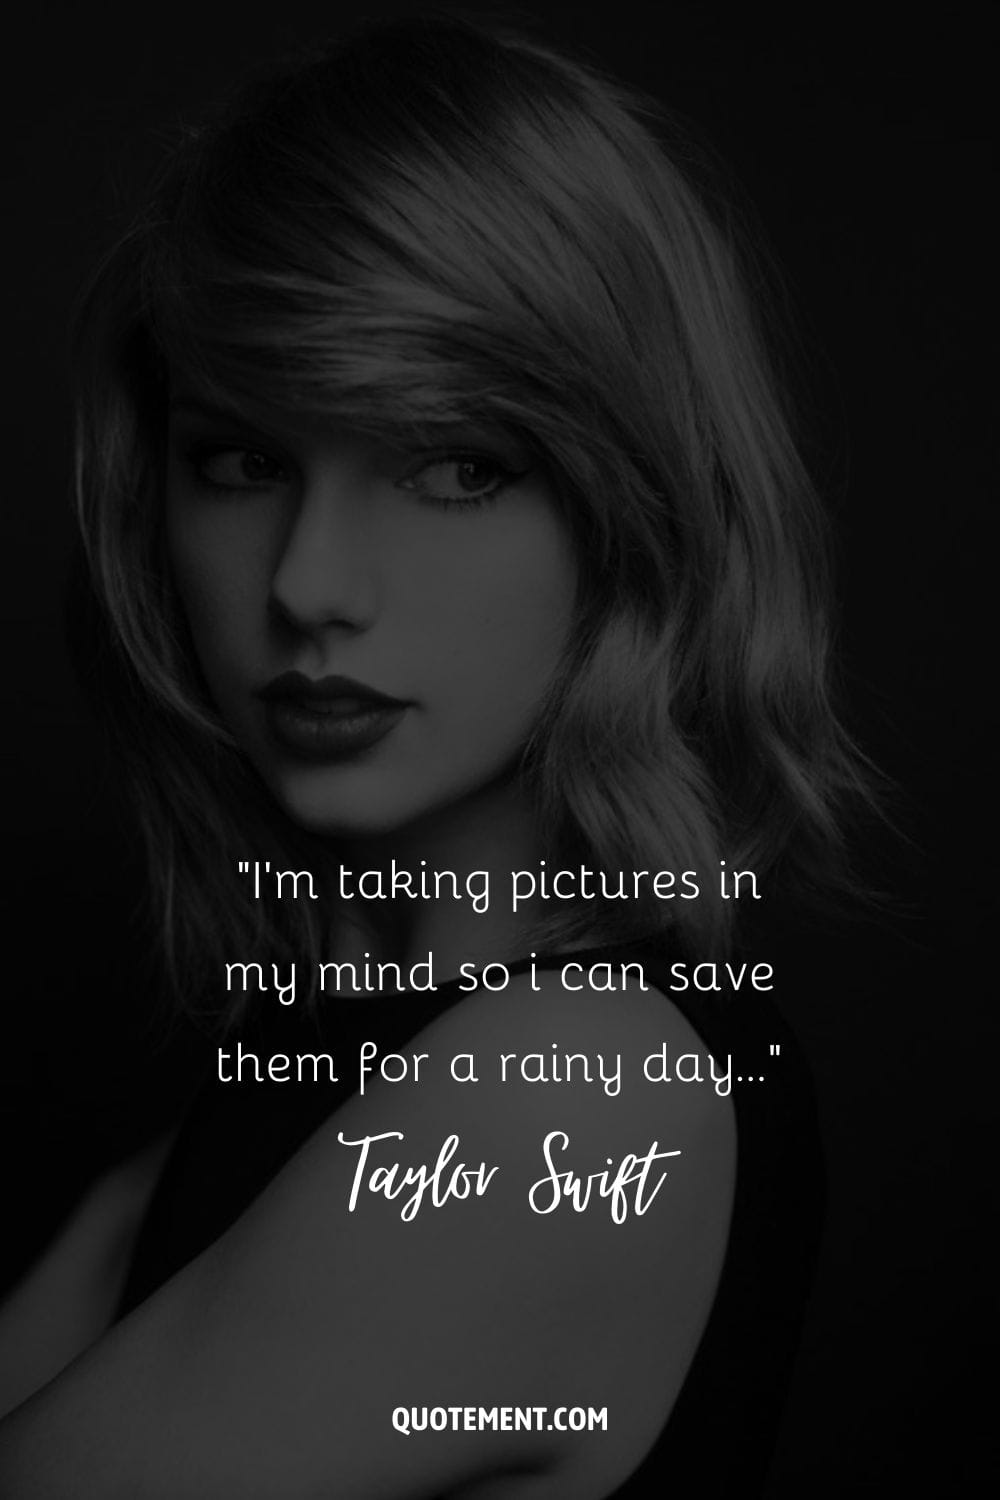 “I'm taking pictures in my mind so i can save them for a rainy day...” ― Taylor Swift